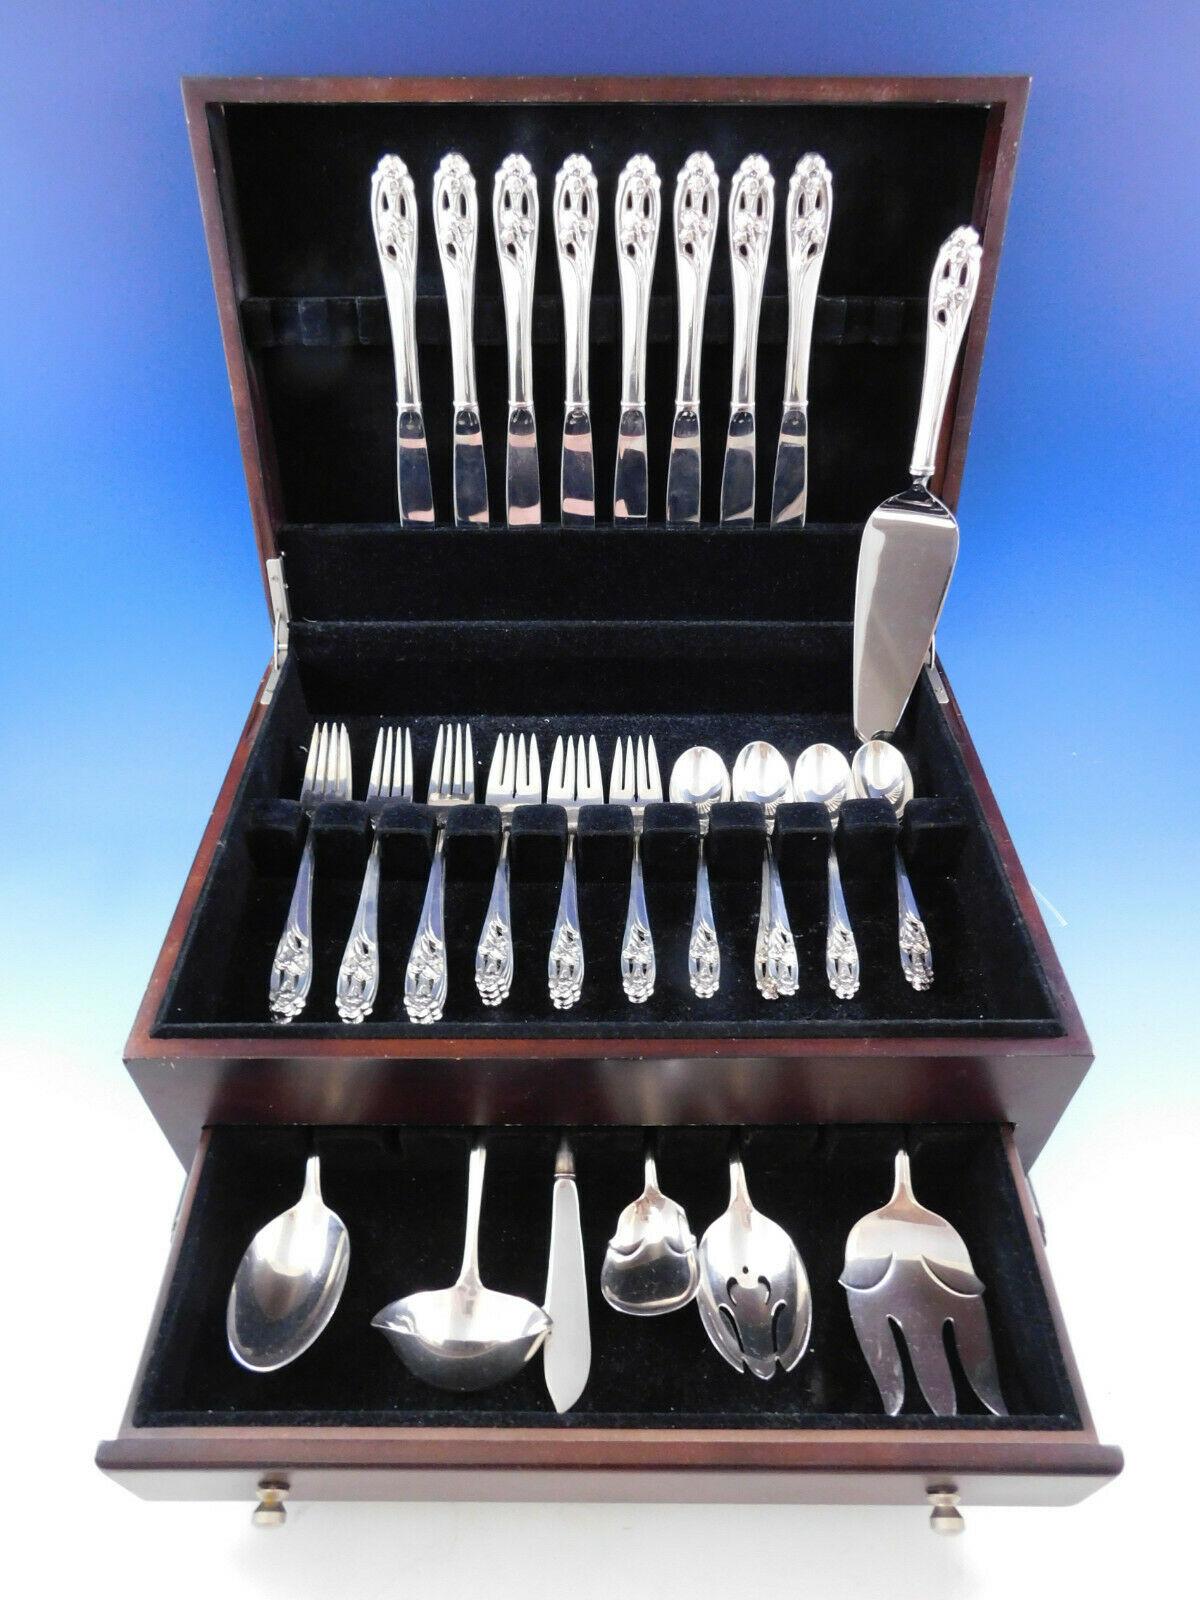 Silver Iris by International sterling silver flatware set with pierced handles and high relief iris detailing - 39 pieces. This set includes:

8 knives, 9 1/4